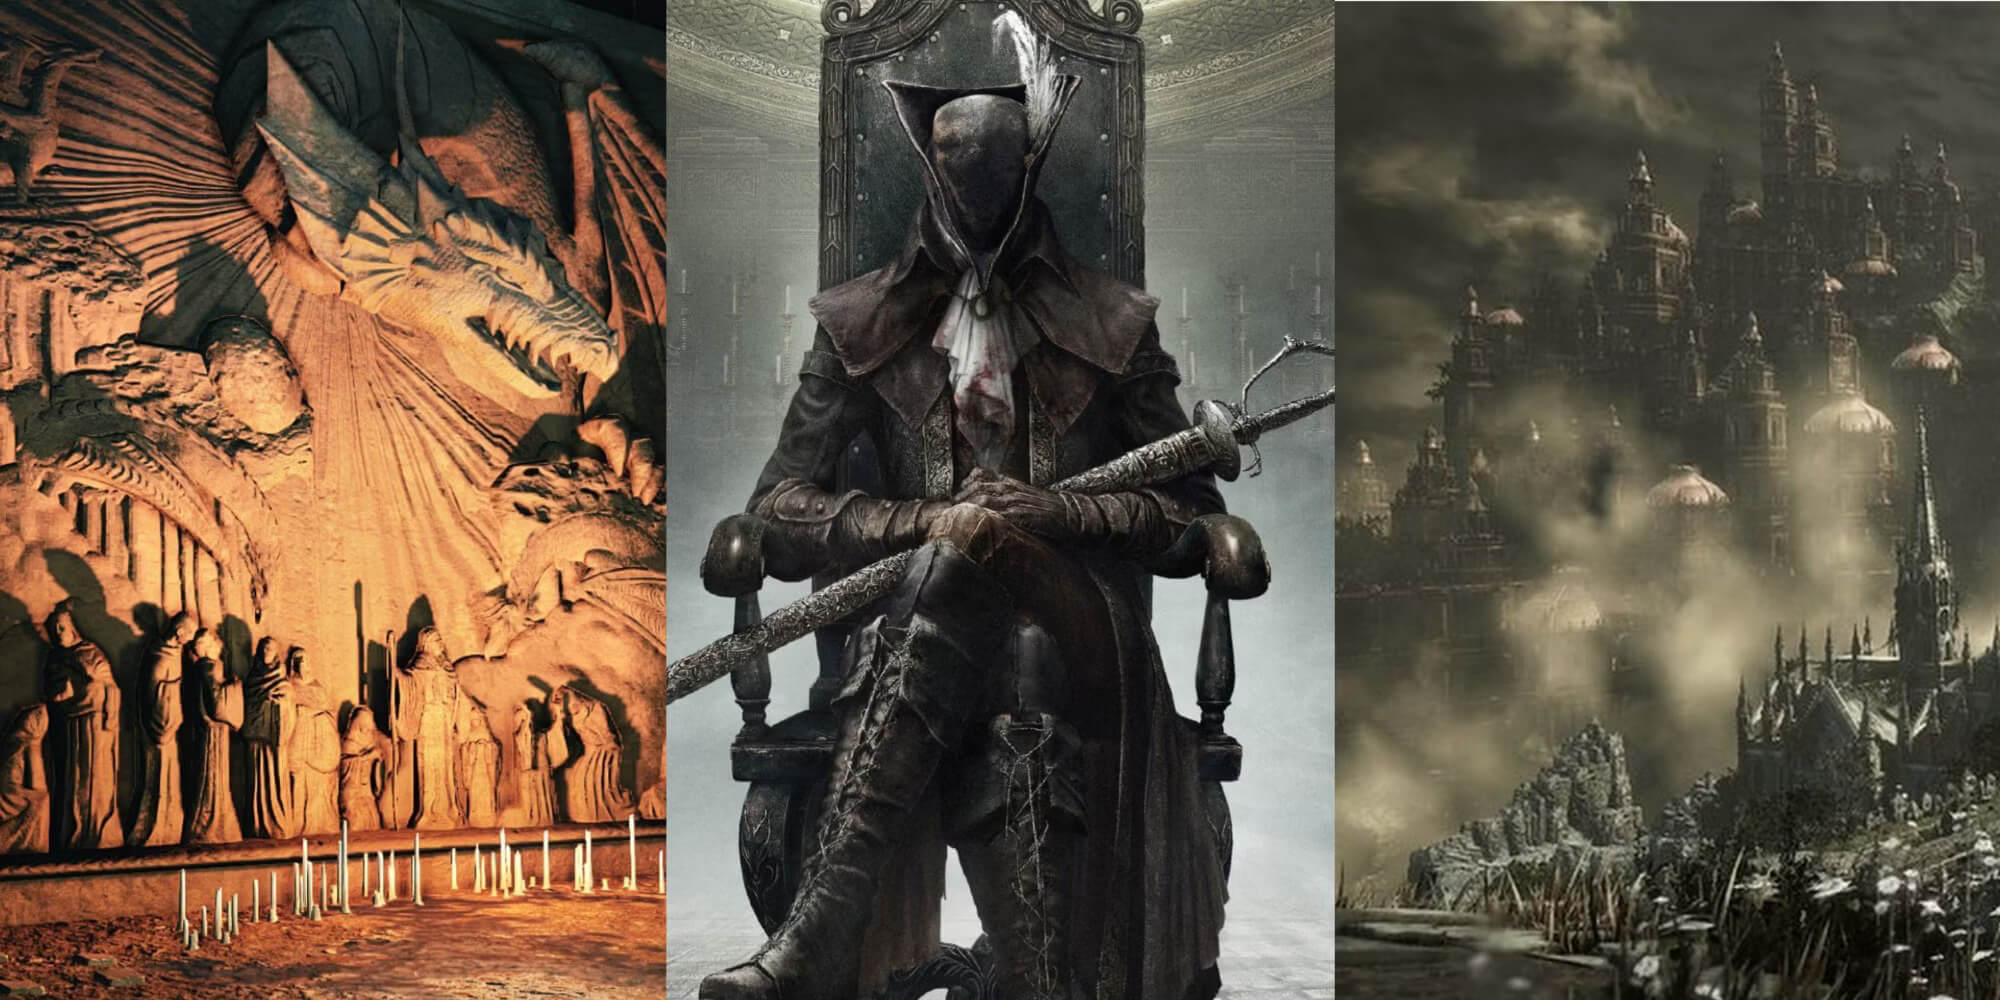 Considering FromSoftware's history, We know Elden Ring's DLC is going to be epic, but that's all we know.